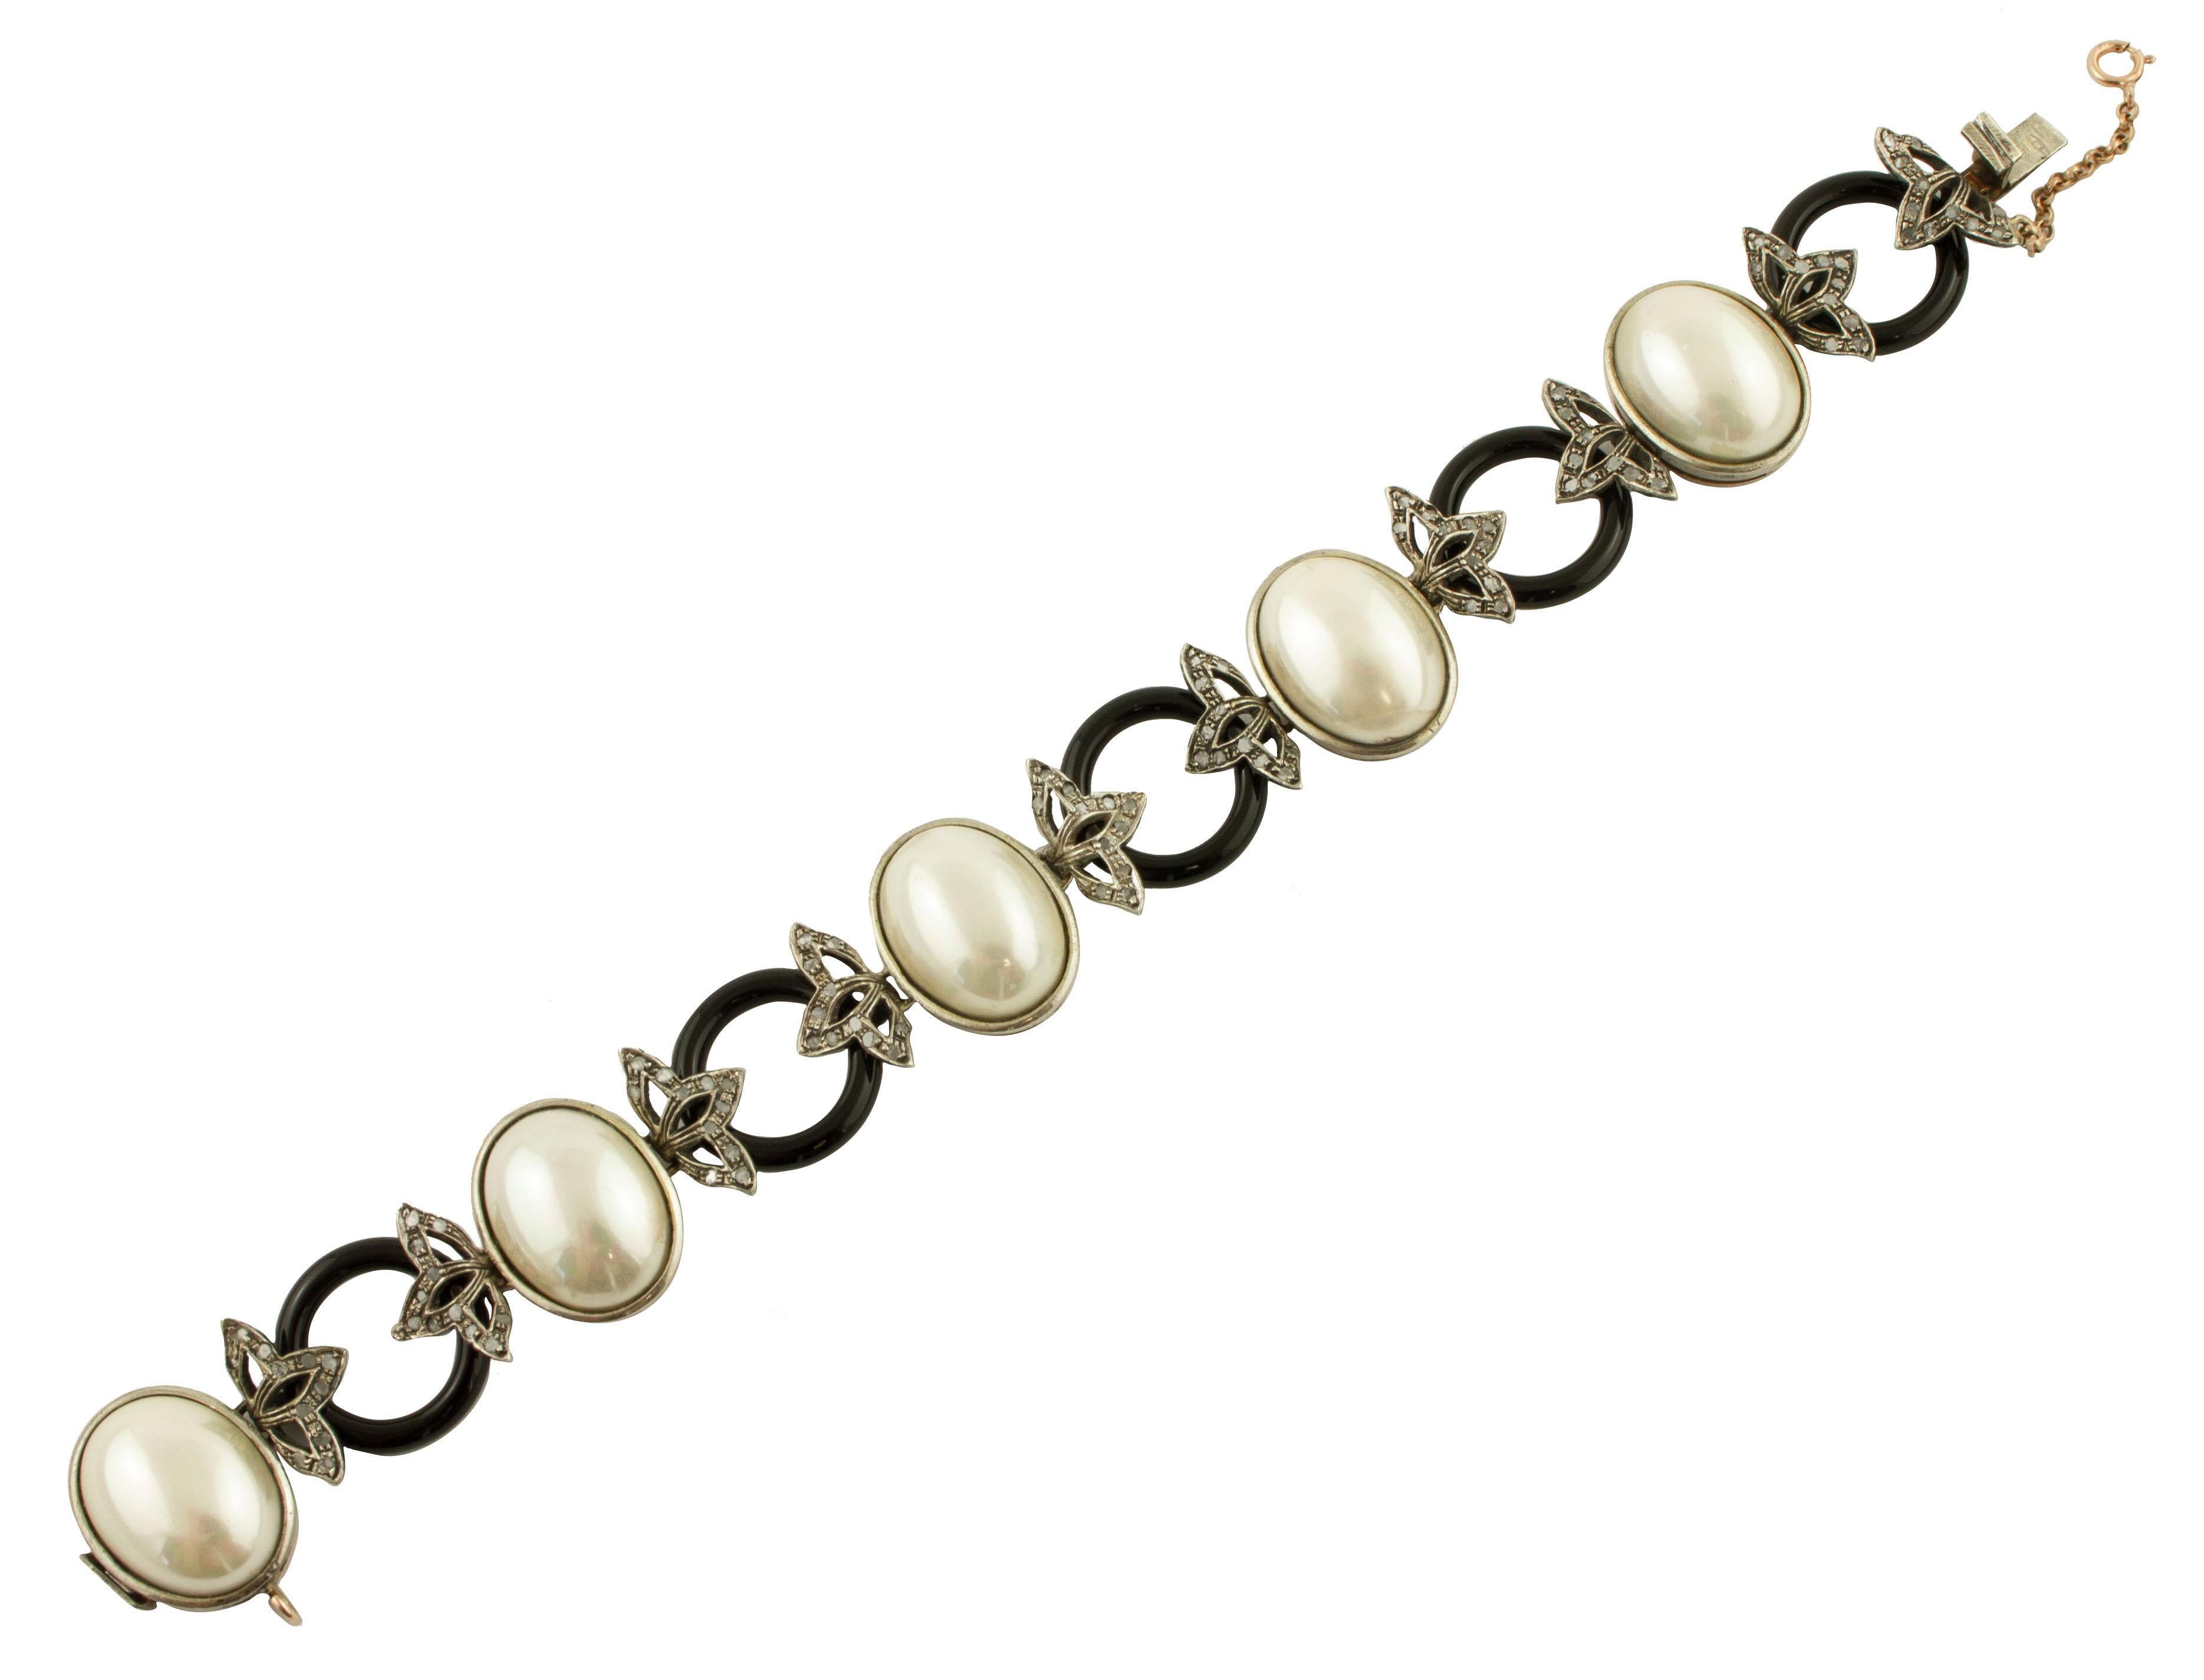 Rose Cut Diamonds, Onyx Rings, White Pearls 9 Karat Rose Gold and Silver Link Bracelet For Sale